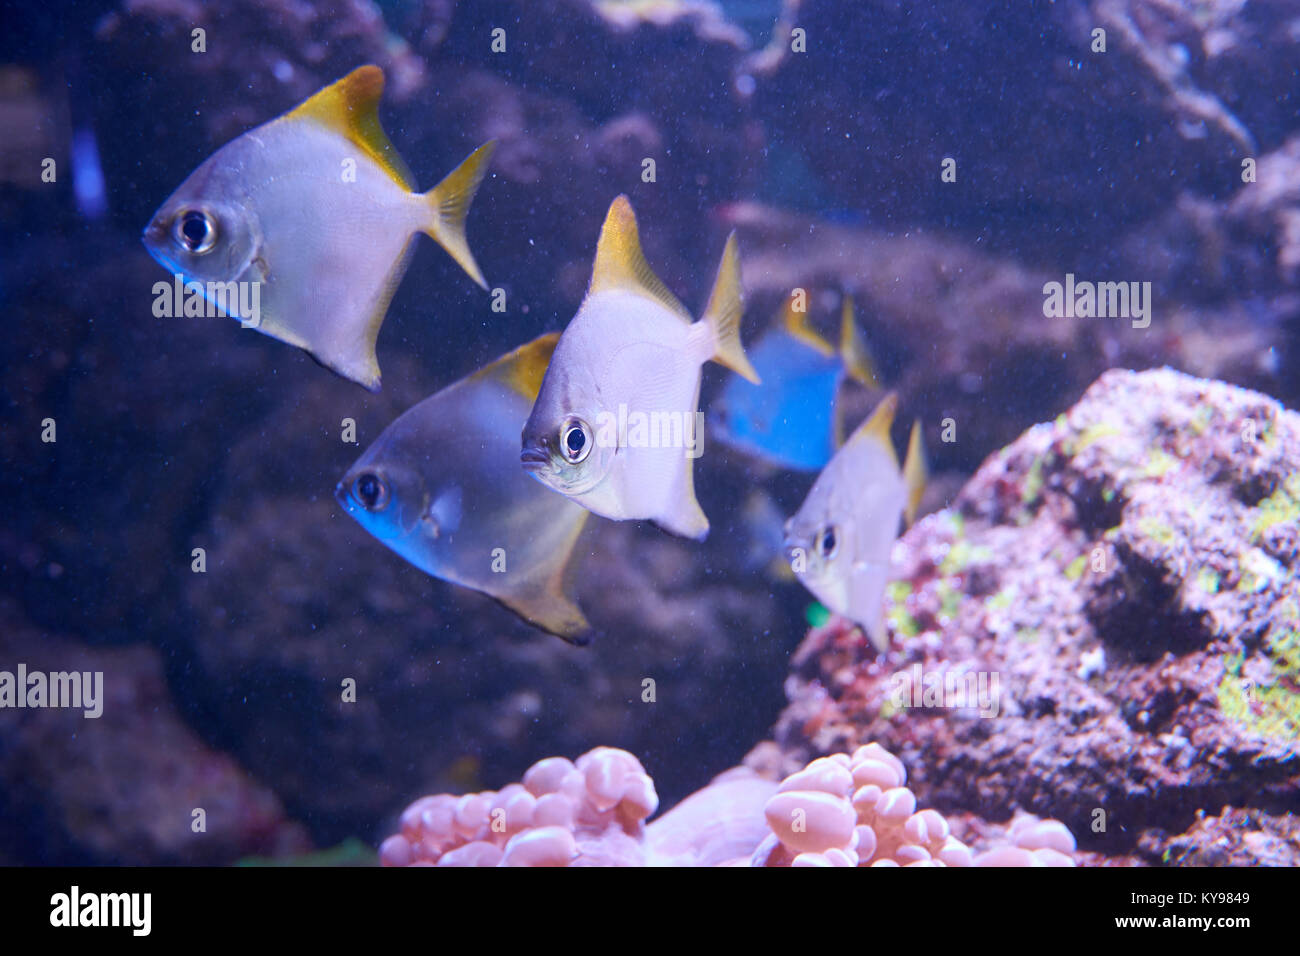 Monodactylus argentus or silver moonyfishes near a reef Stock Photo